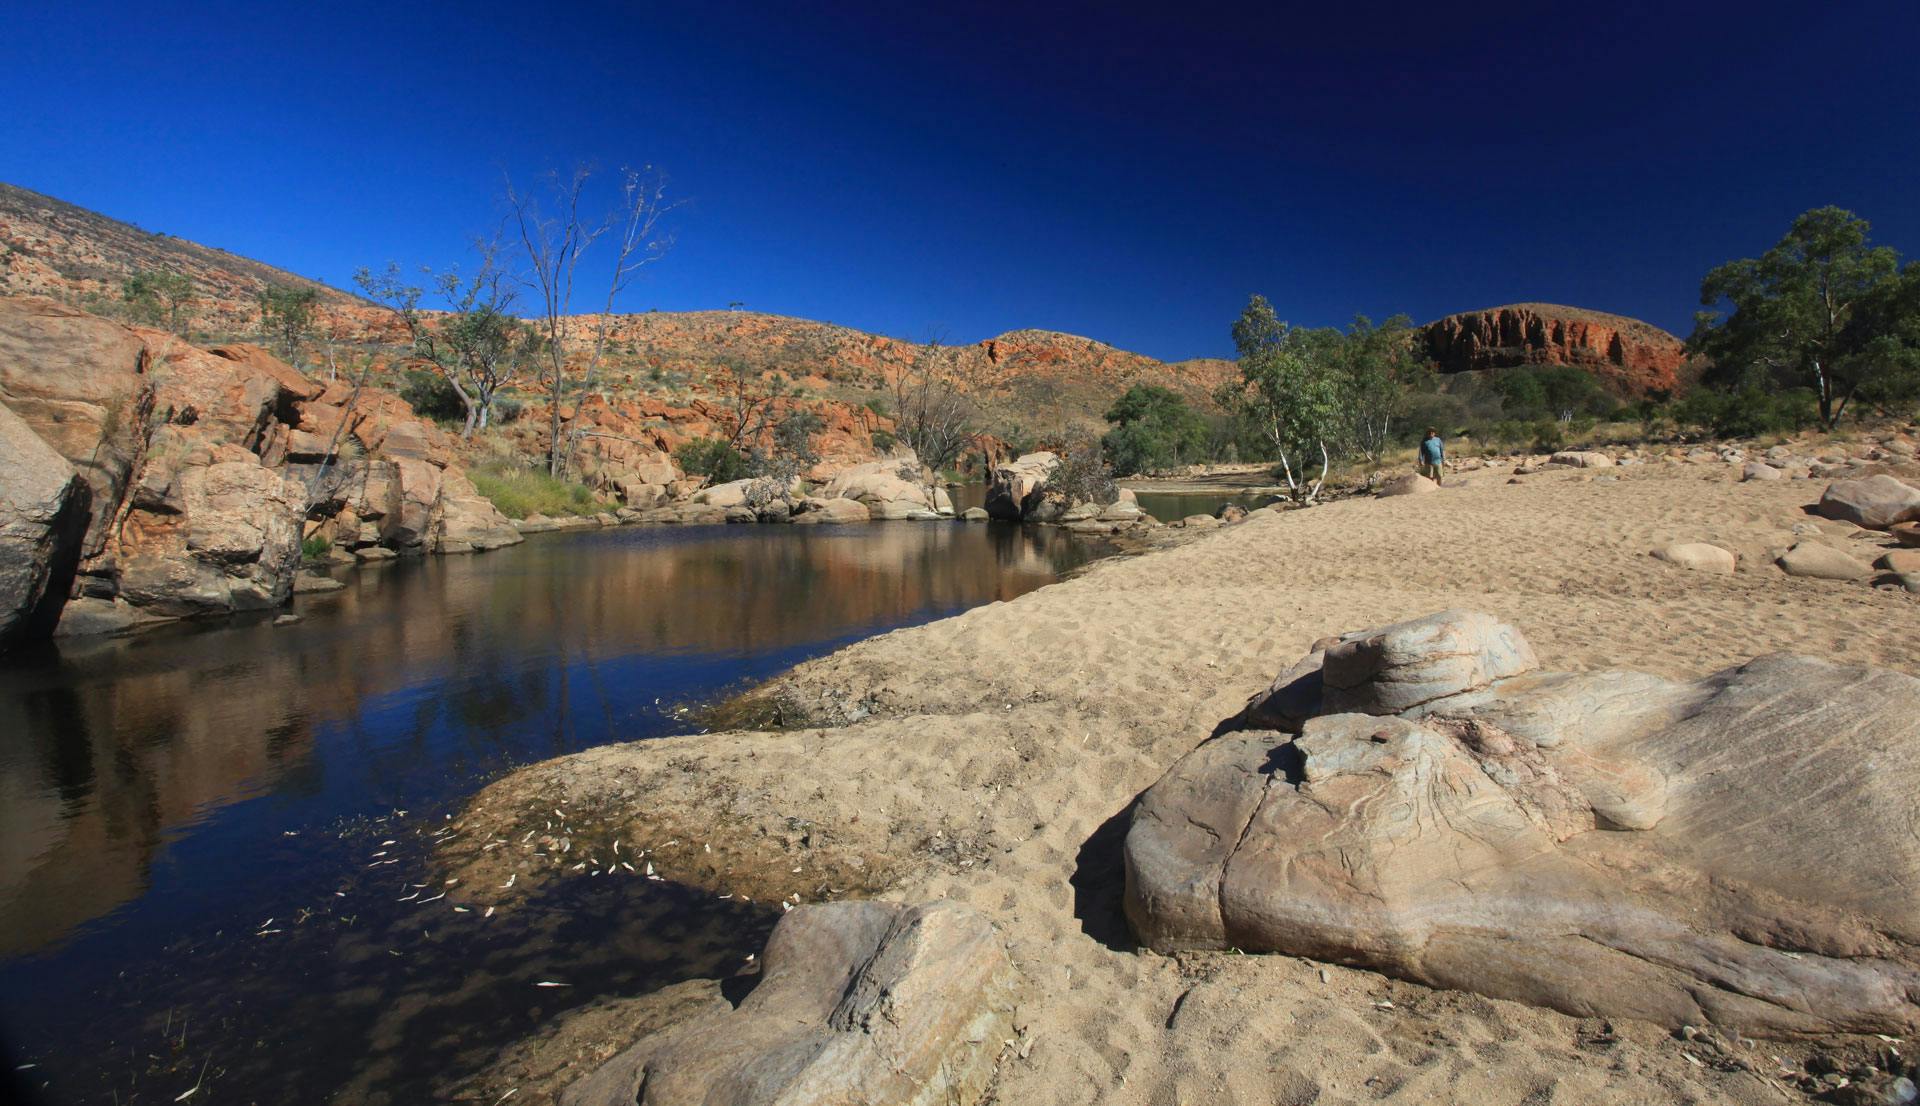 Rocks and sand next to water - experience unique personal development in the heart of Australia